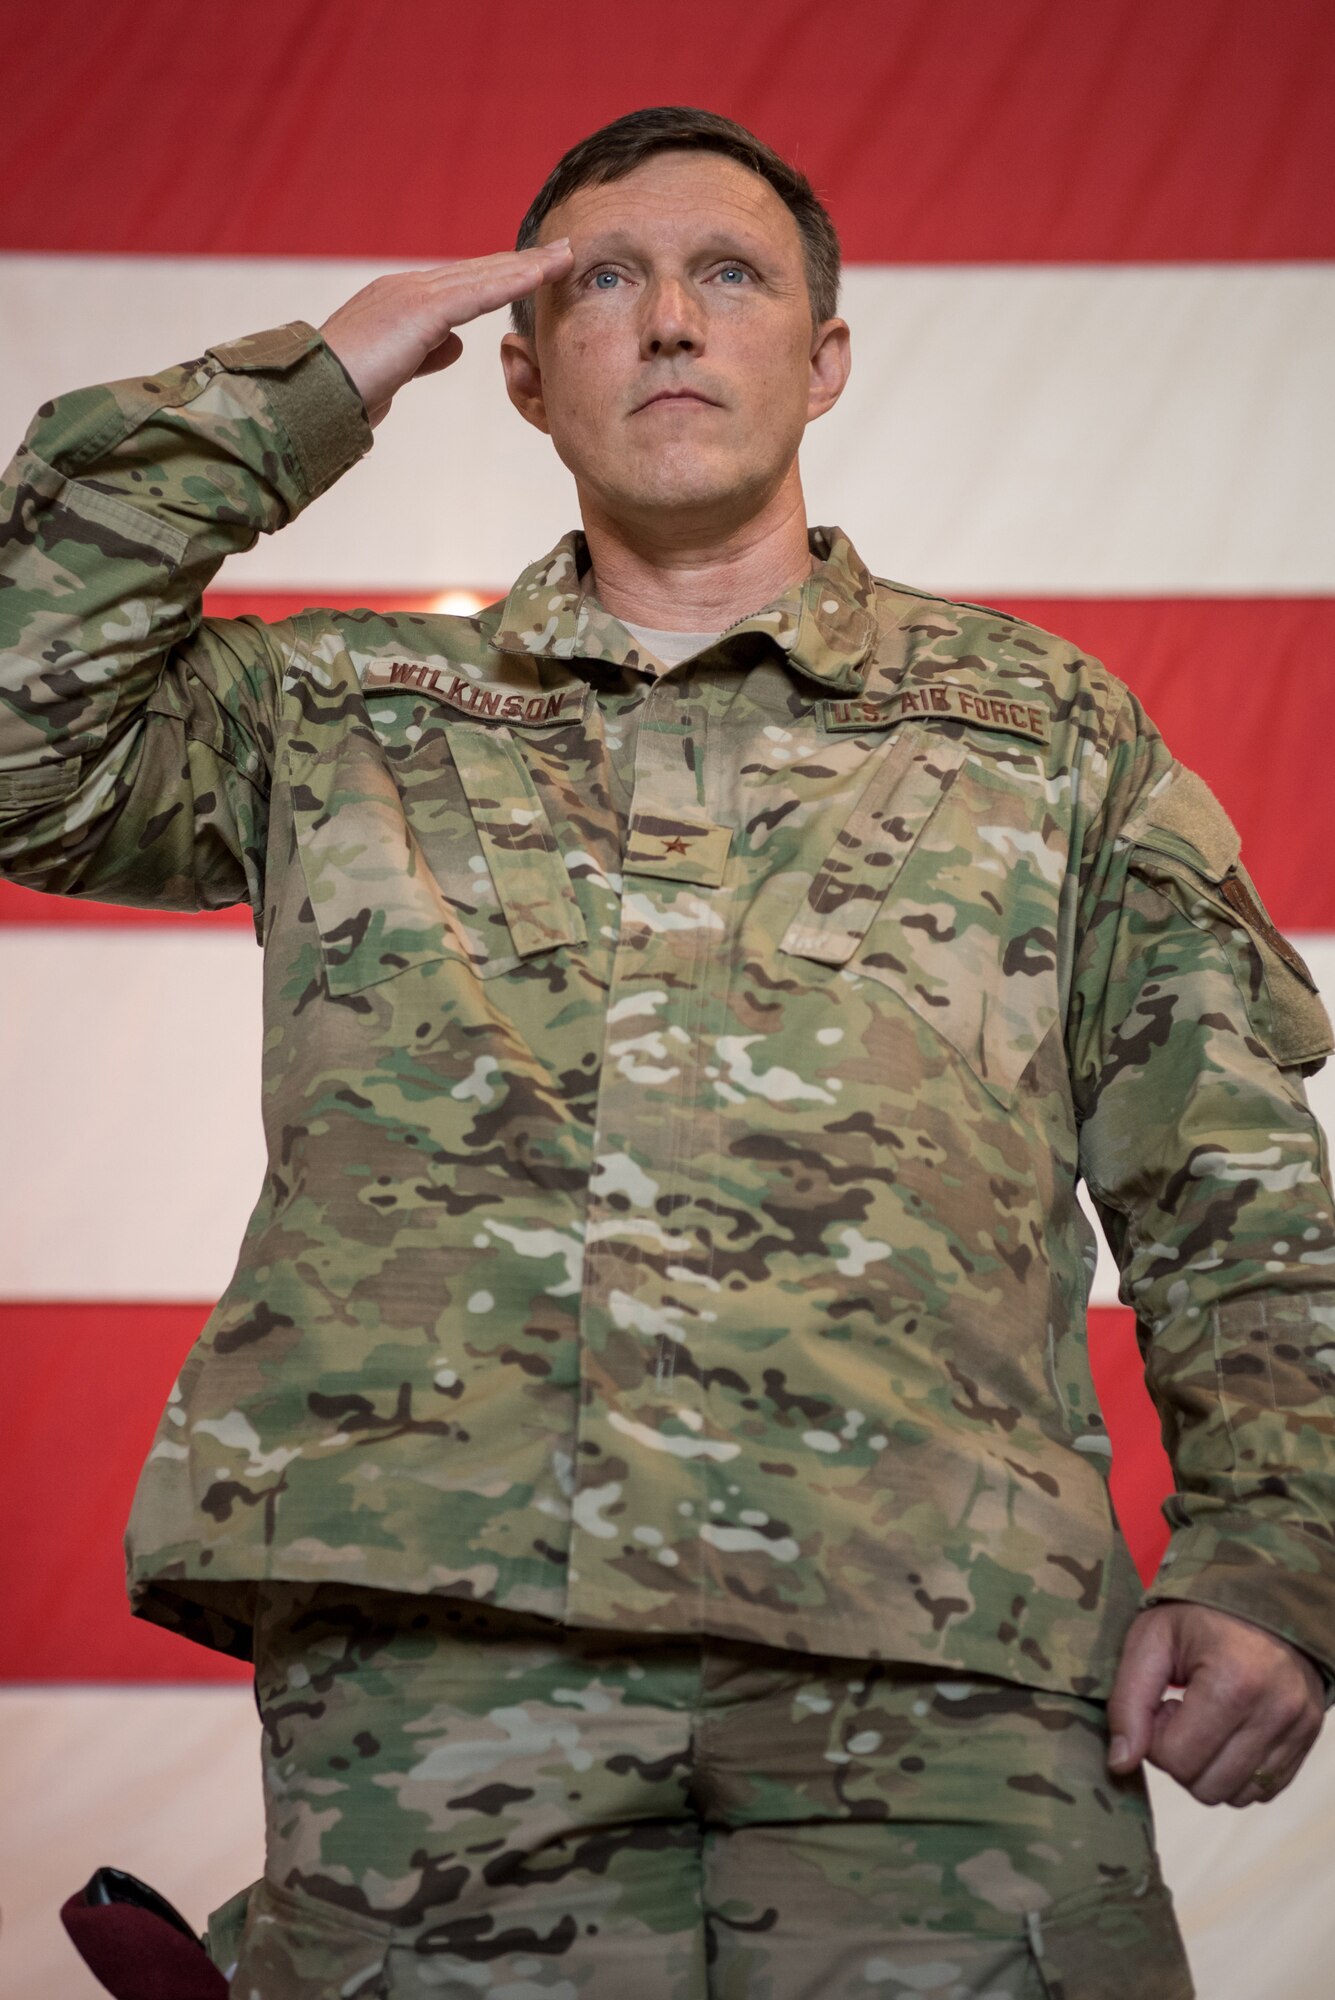 Brig. Gen. Jeffrey Wilkinson receives his first salute as Kentucky’s new assistant adjutant general for Air during a transfer-of-responsibility ceremony at the Kentucky Air National Guard Base in Louisville, Ky., Aug. 11, 2019. Wilkinson replaces Brig. Gen. Warren Hurst, who held the post for six years. (U.S. Air National Guard photo by Staff Sgt. Joshua Horton)